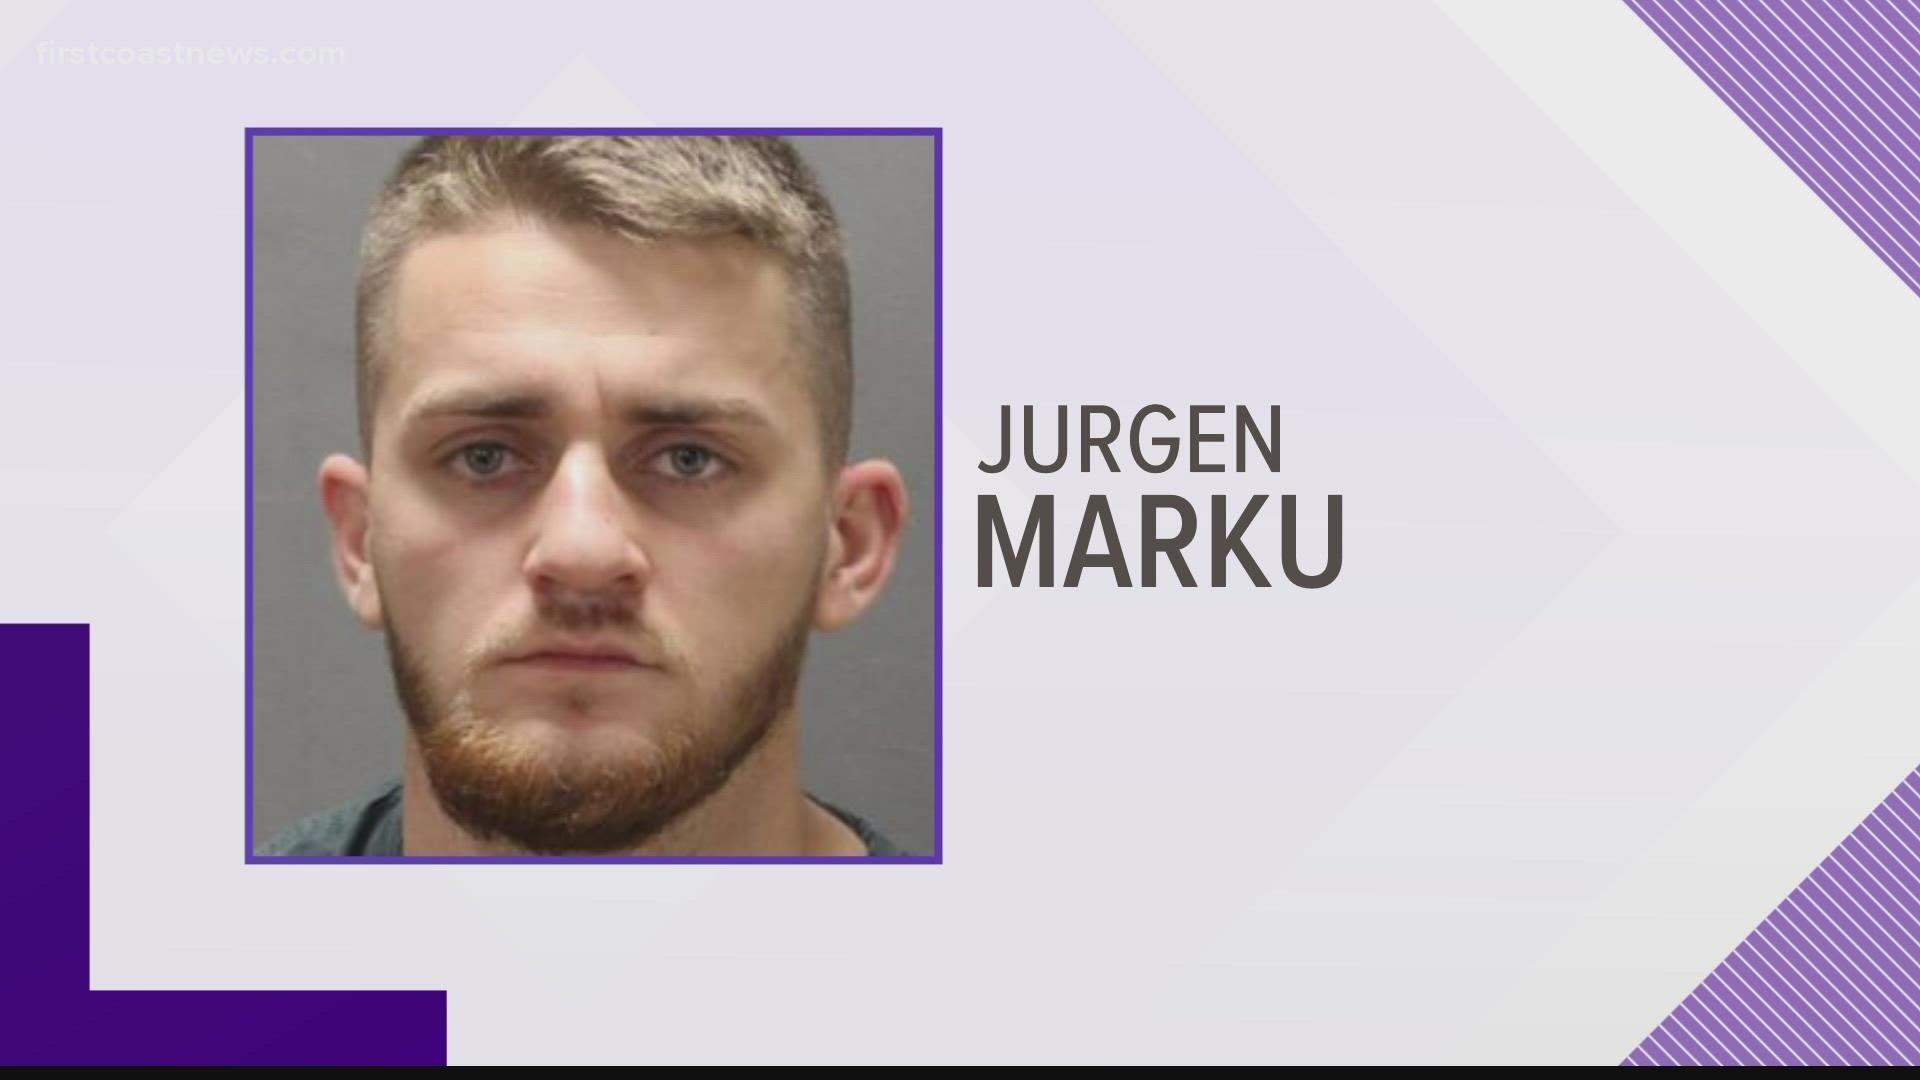 Jurgen Marku is charged with conspiracy to commit armed robber and second-degree murder.